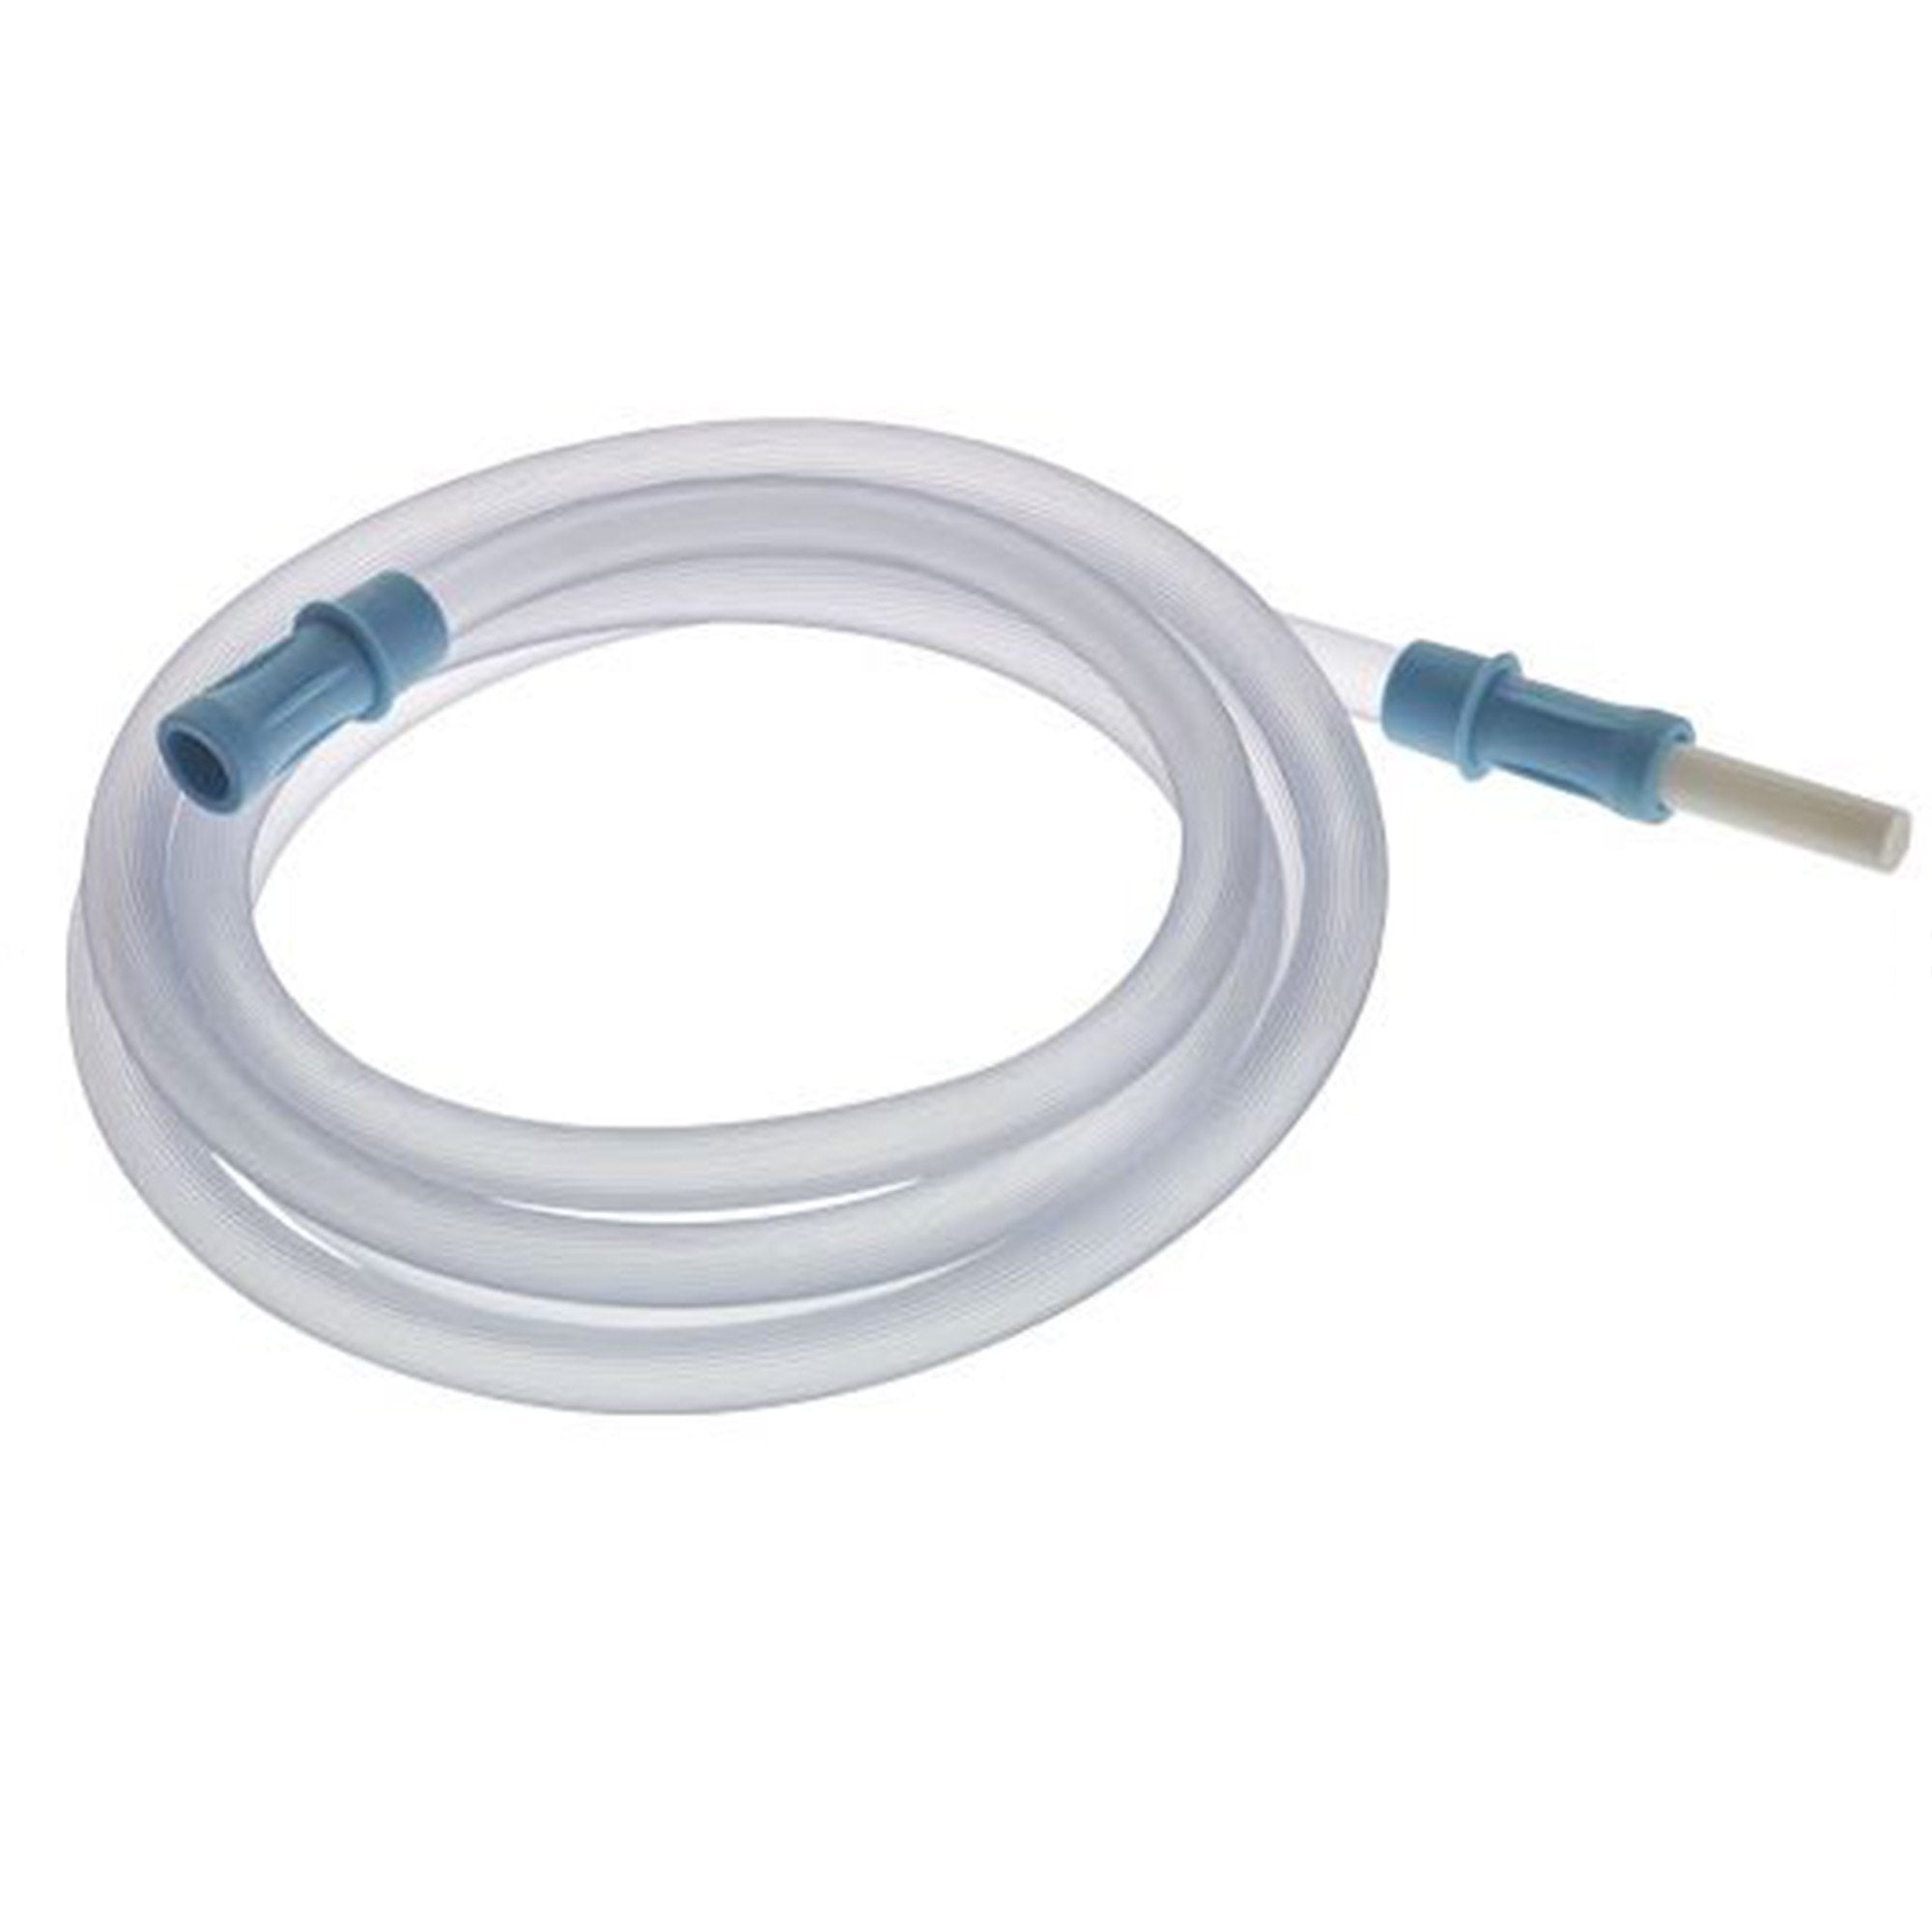 Suction Connector Tubing AMSure 10 Foot Length 0.25 Inch I.D. Sterile Tube to Tube Connector Clear NonConductive PVC